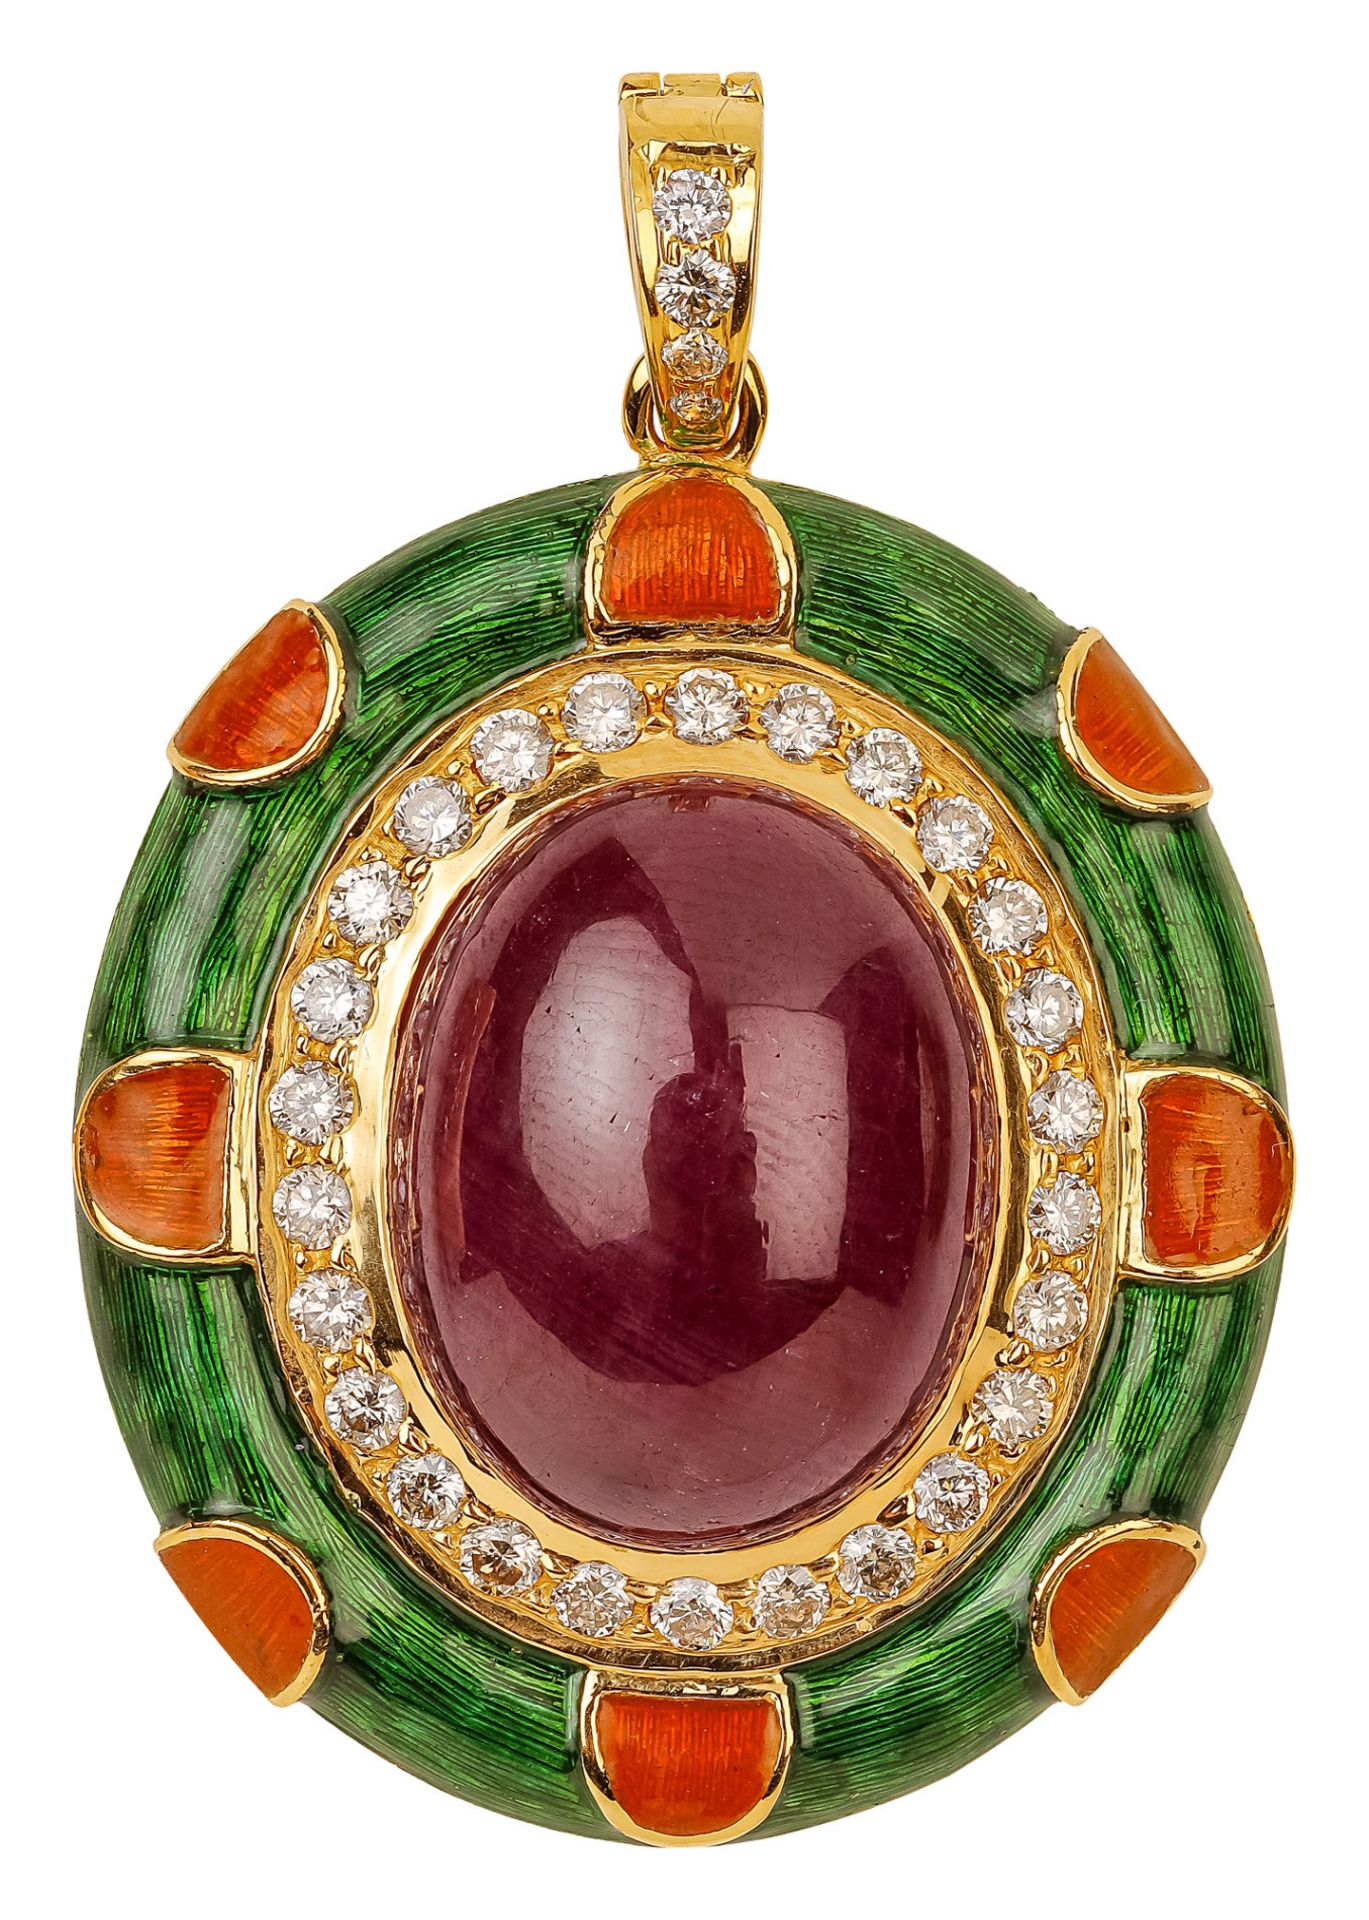 Necklace pendant with one ruby weighing almost 50 carats and diamonds